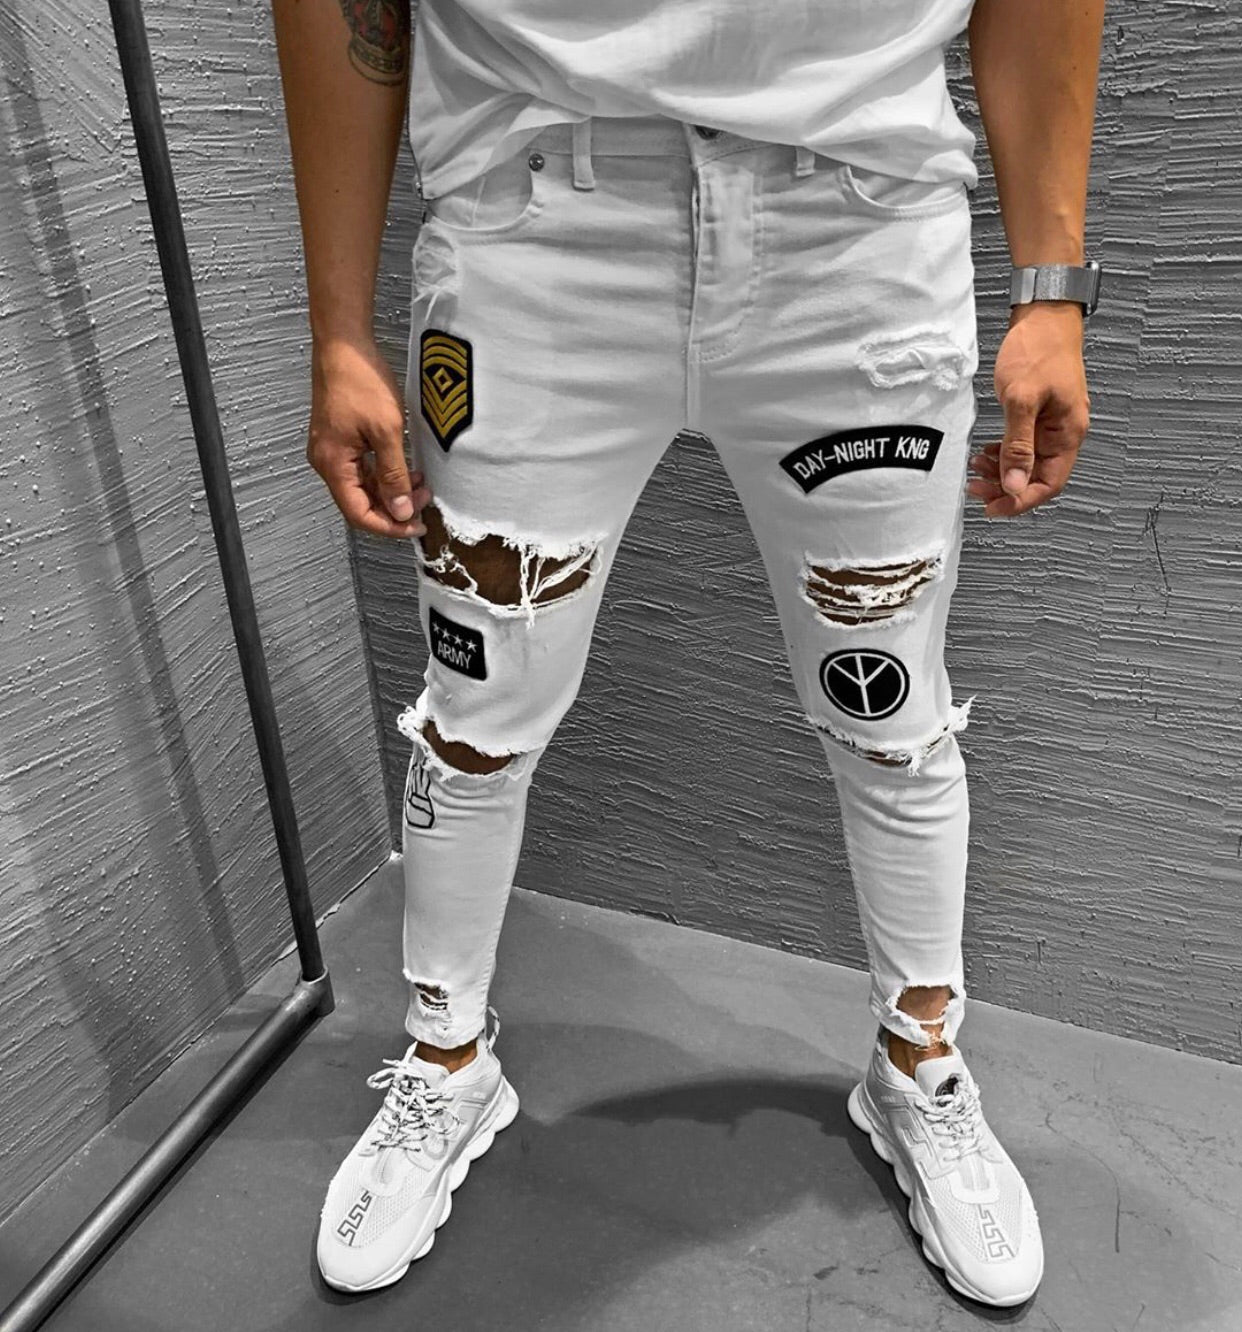 white destroyed jeans mens